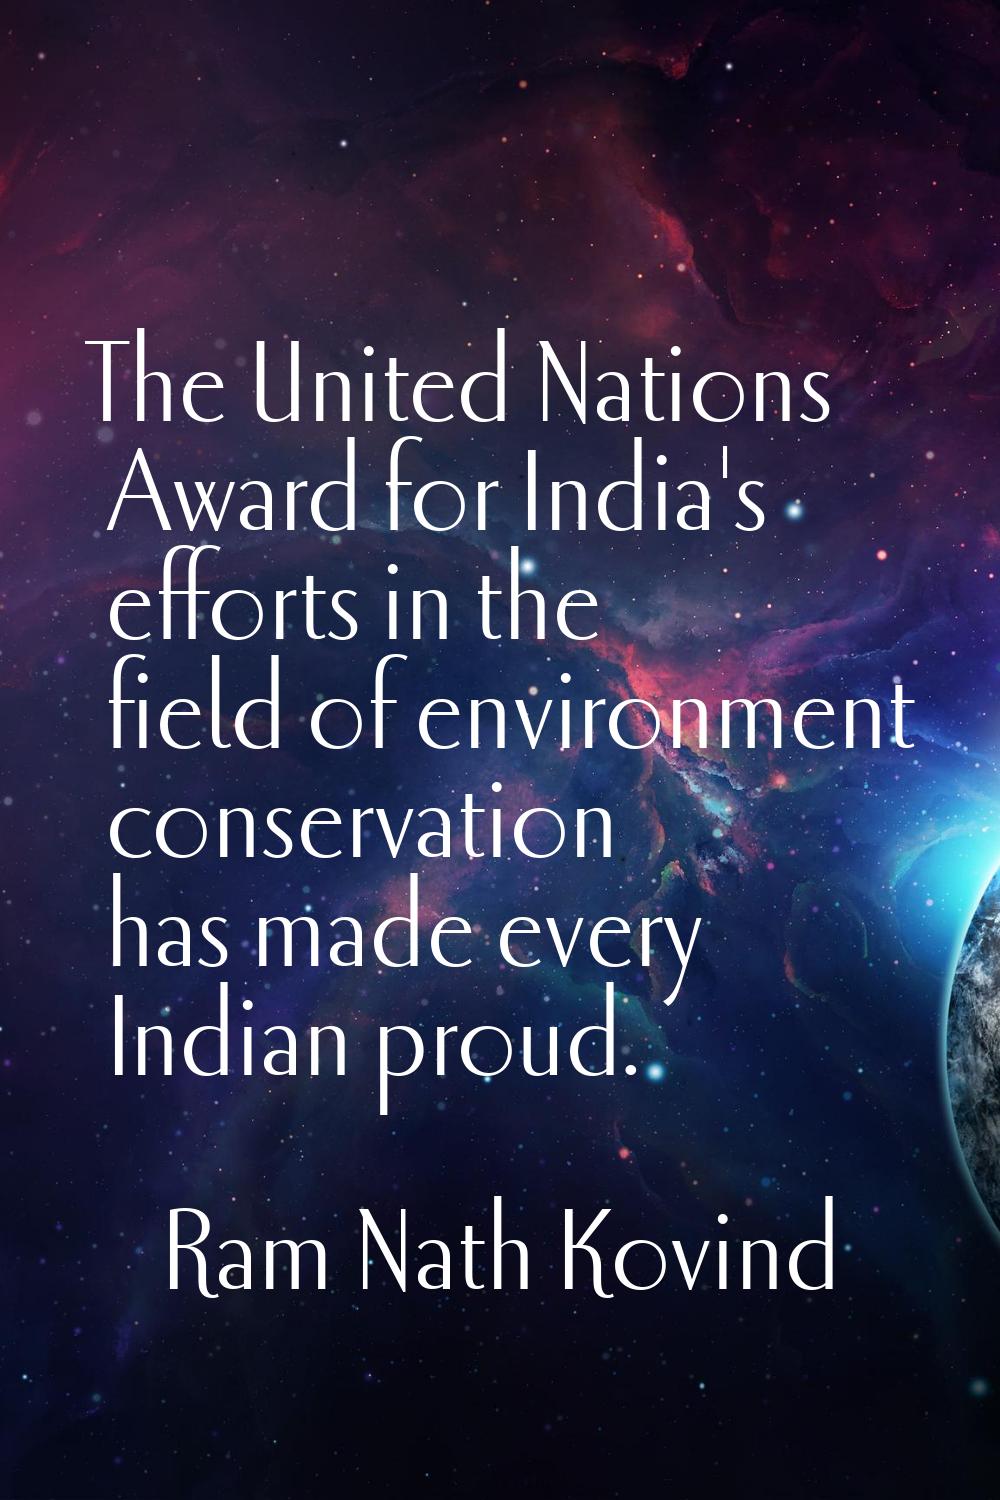 The United Nations Award for India's efforts in the field of environment conservation has made ever